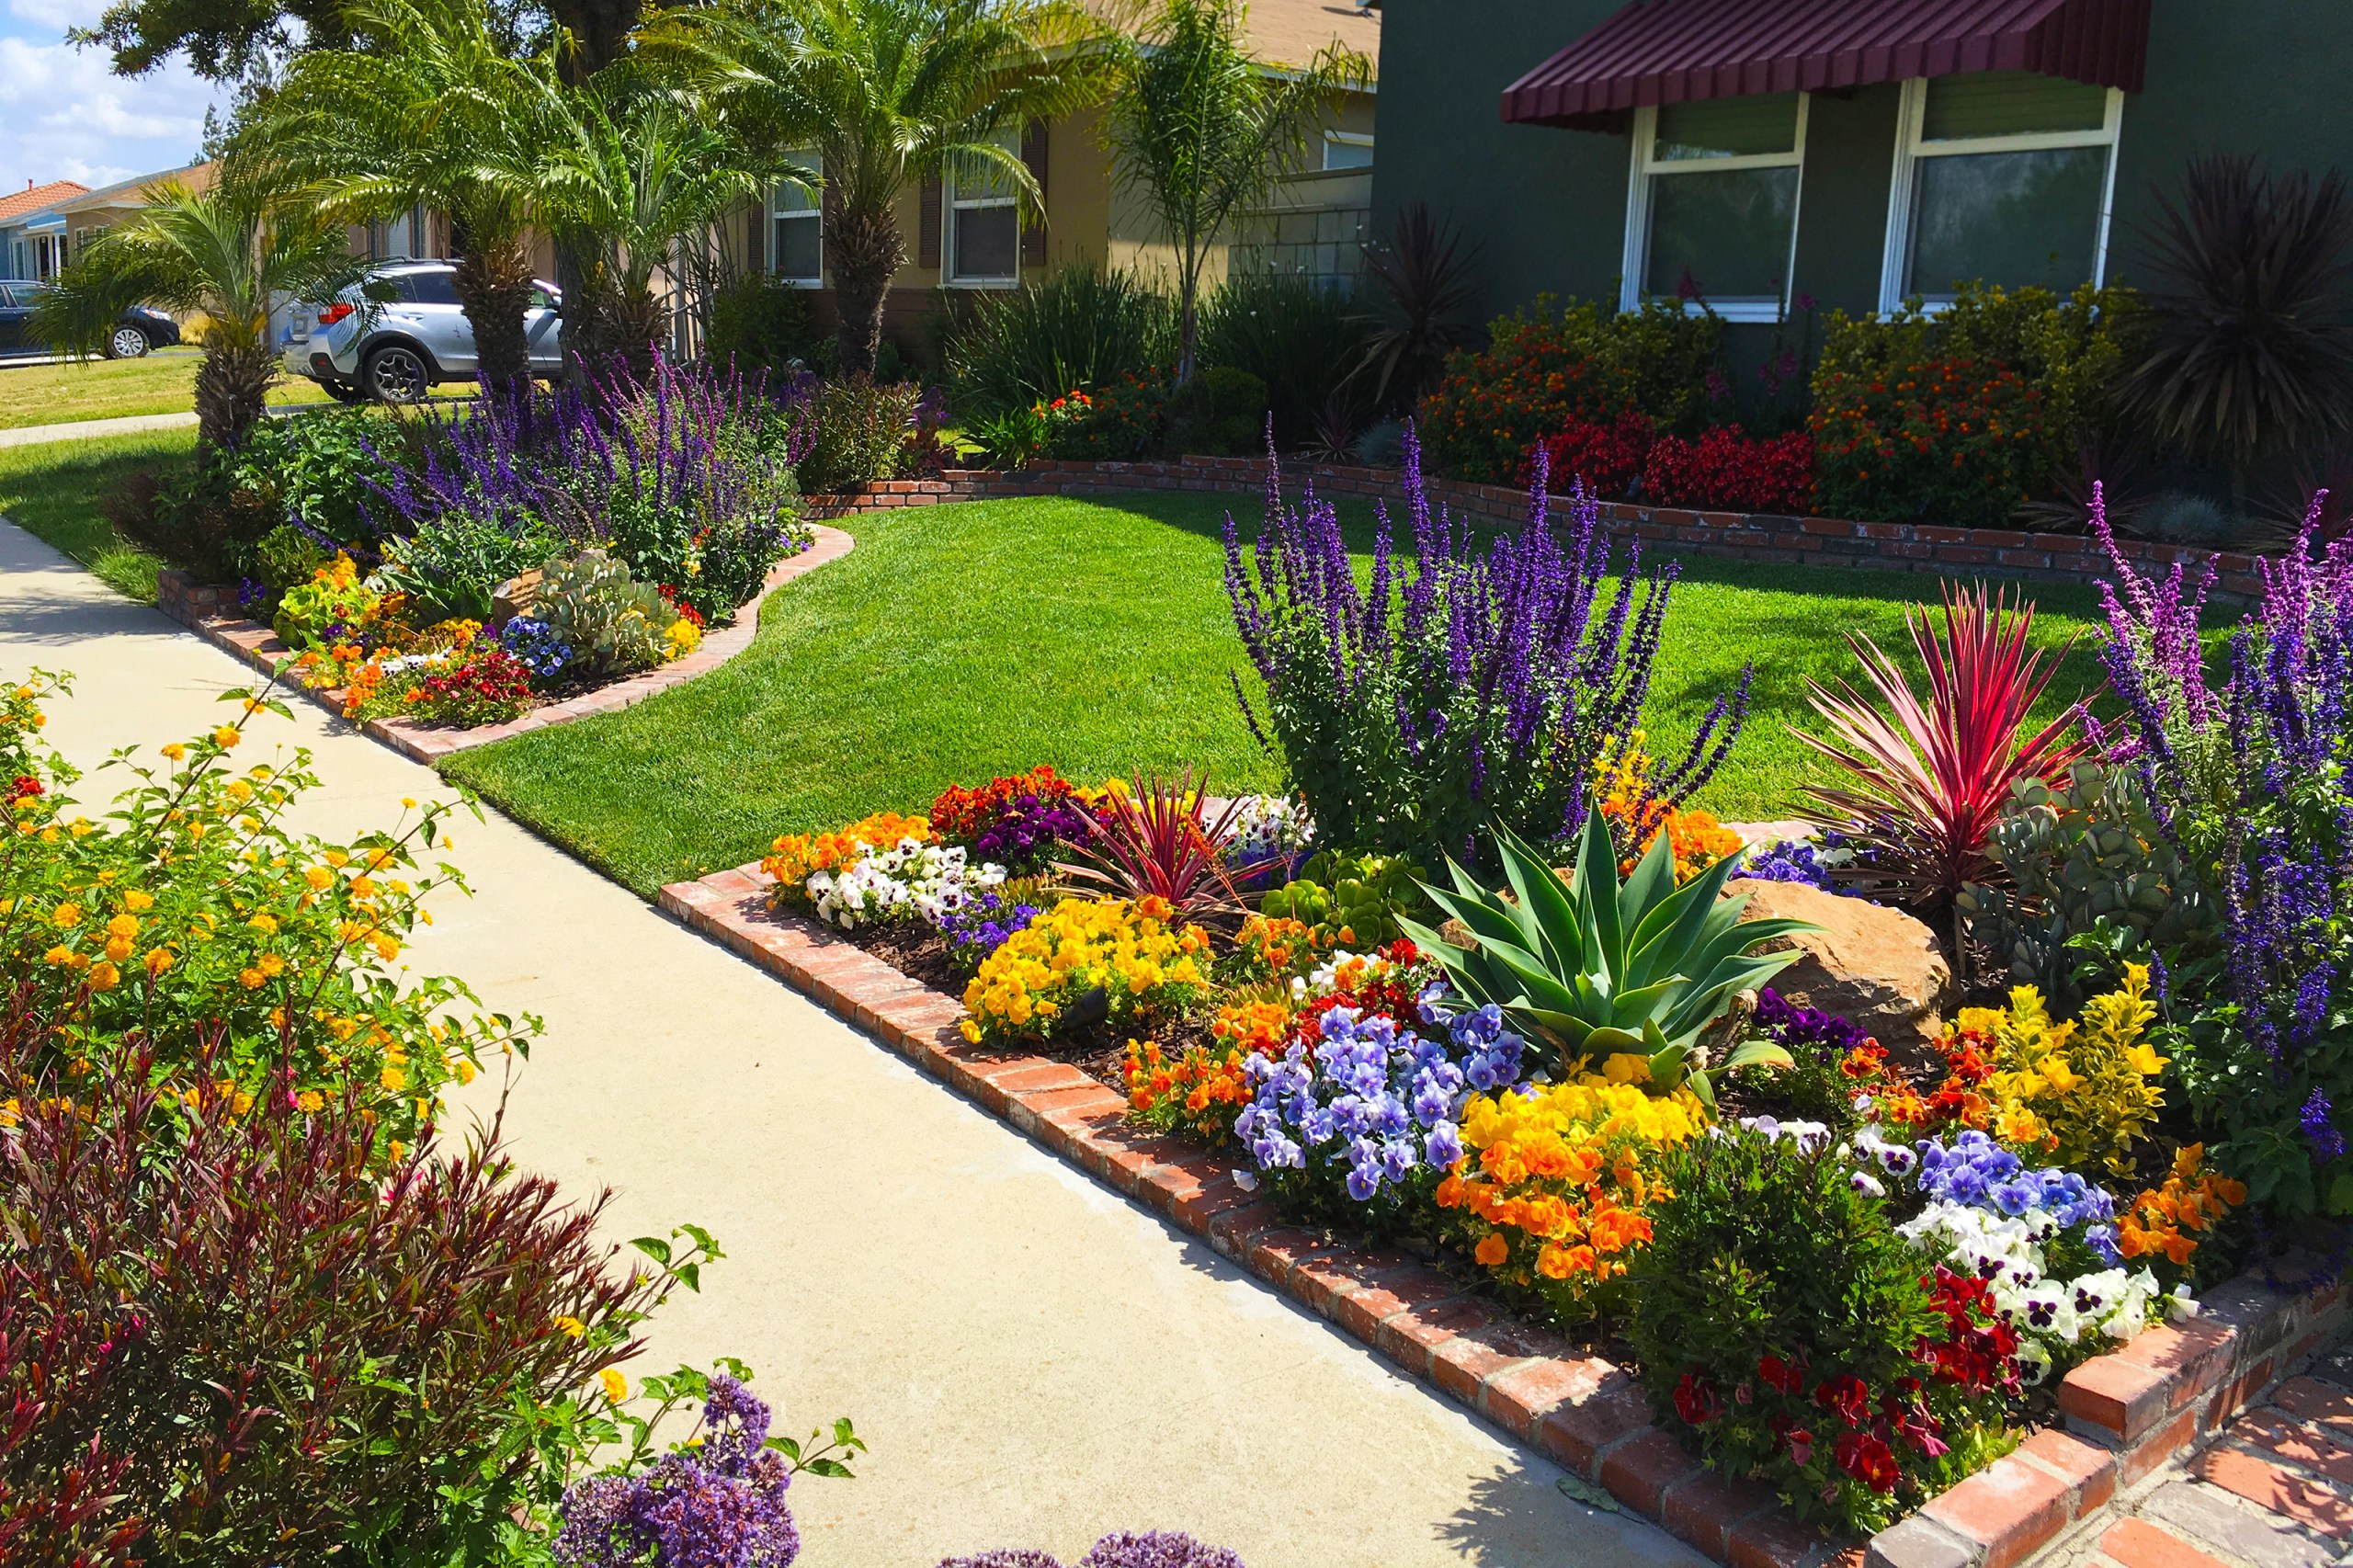 All About Landscape Design Options - High School Of Performing ArtsHigh